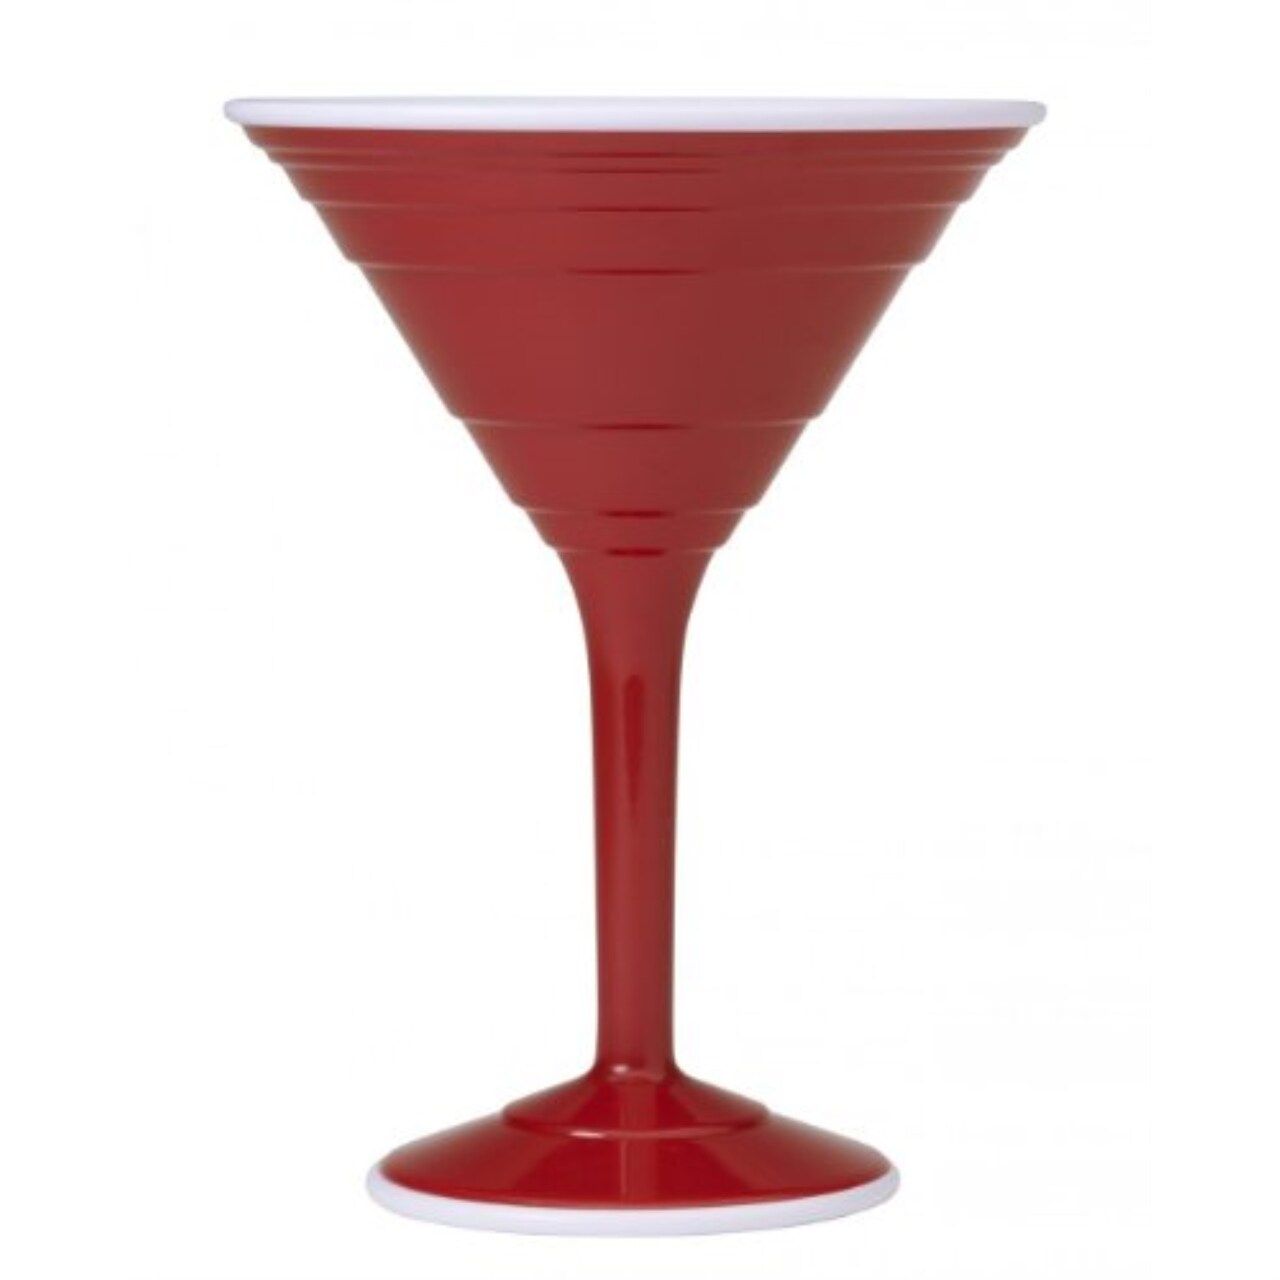 Red Cup Living Reusable Cocktail Cup, 12-Ounce, Red